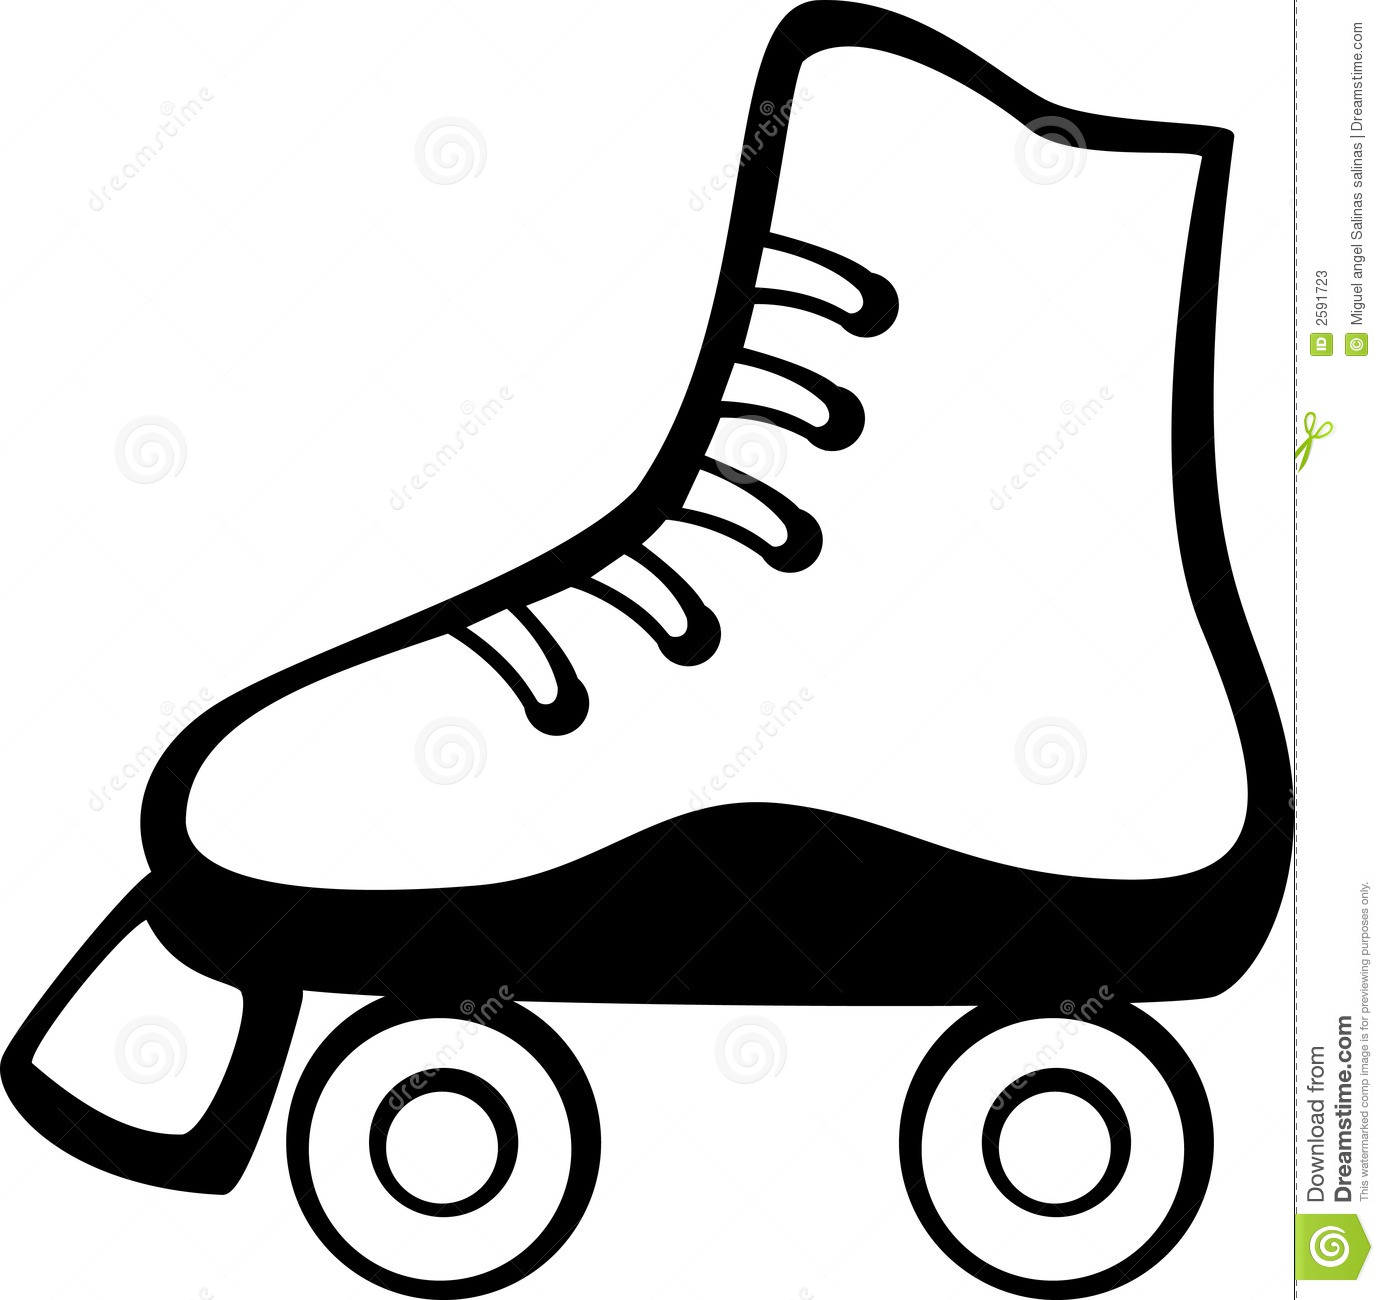 Roller 20clipart Clipart Pand - Roller Skating Clipart